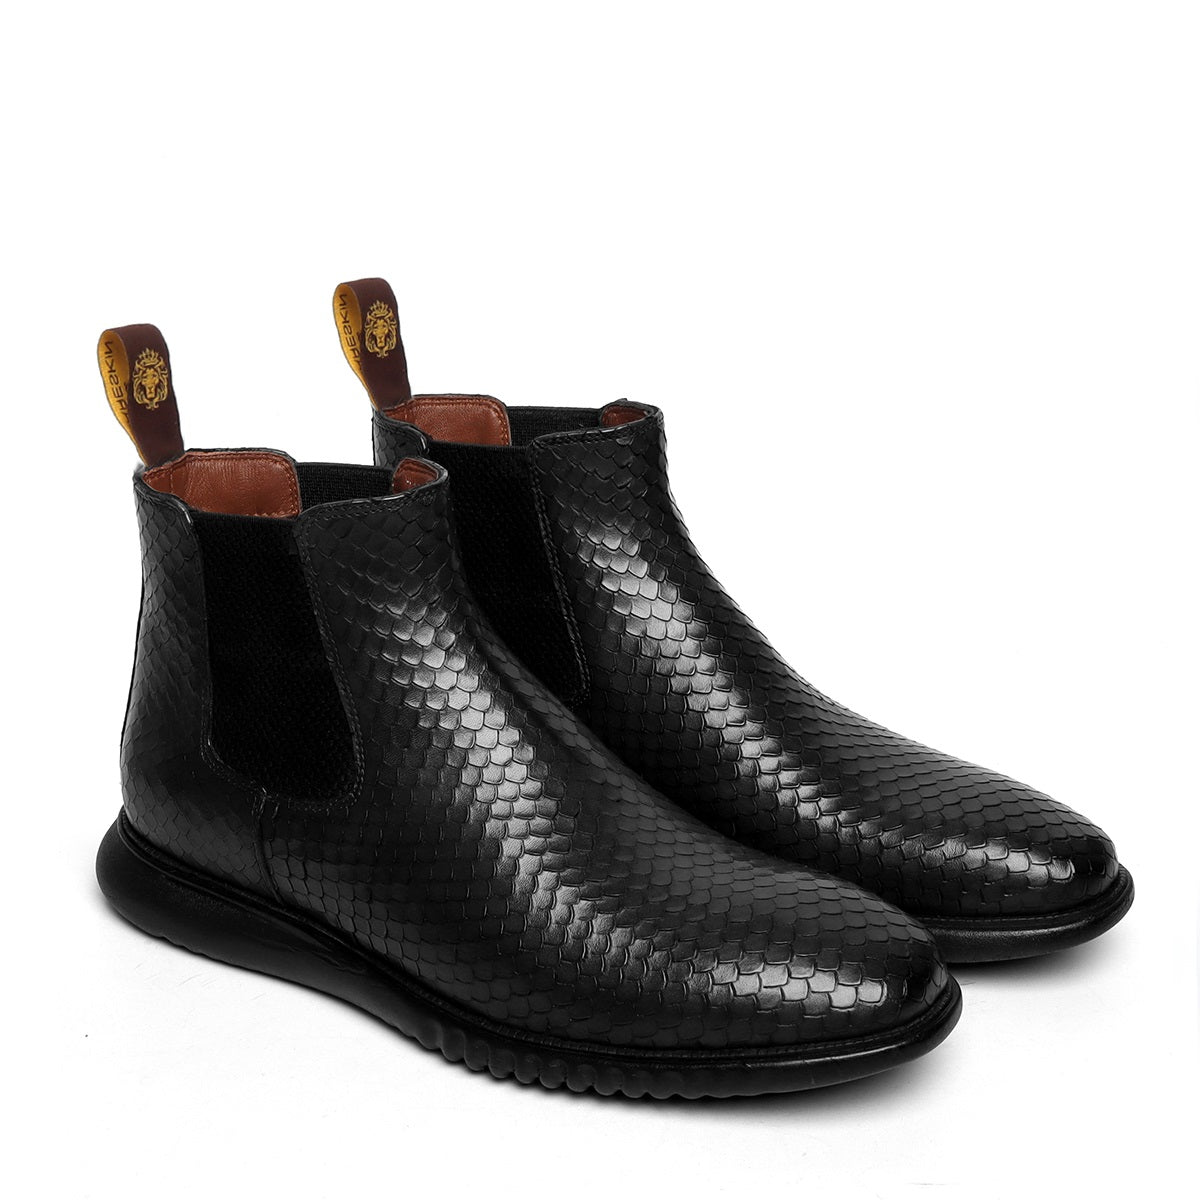 Black Snake Skin Textured Leather Chelsea Boot with Hand scaling and Light weight sole by Brune & Bareskin